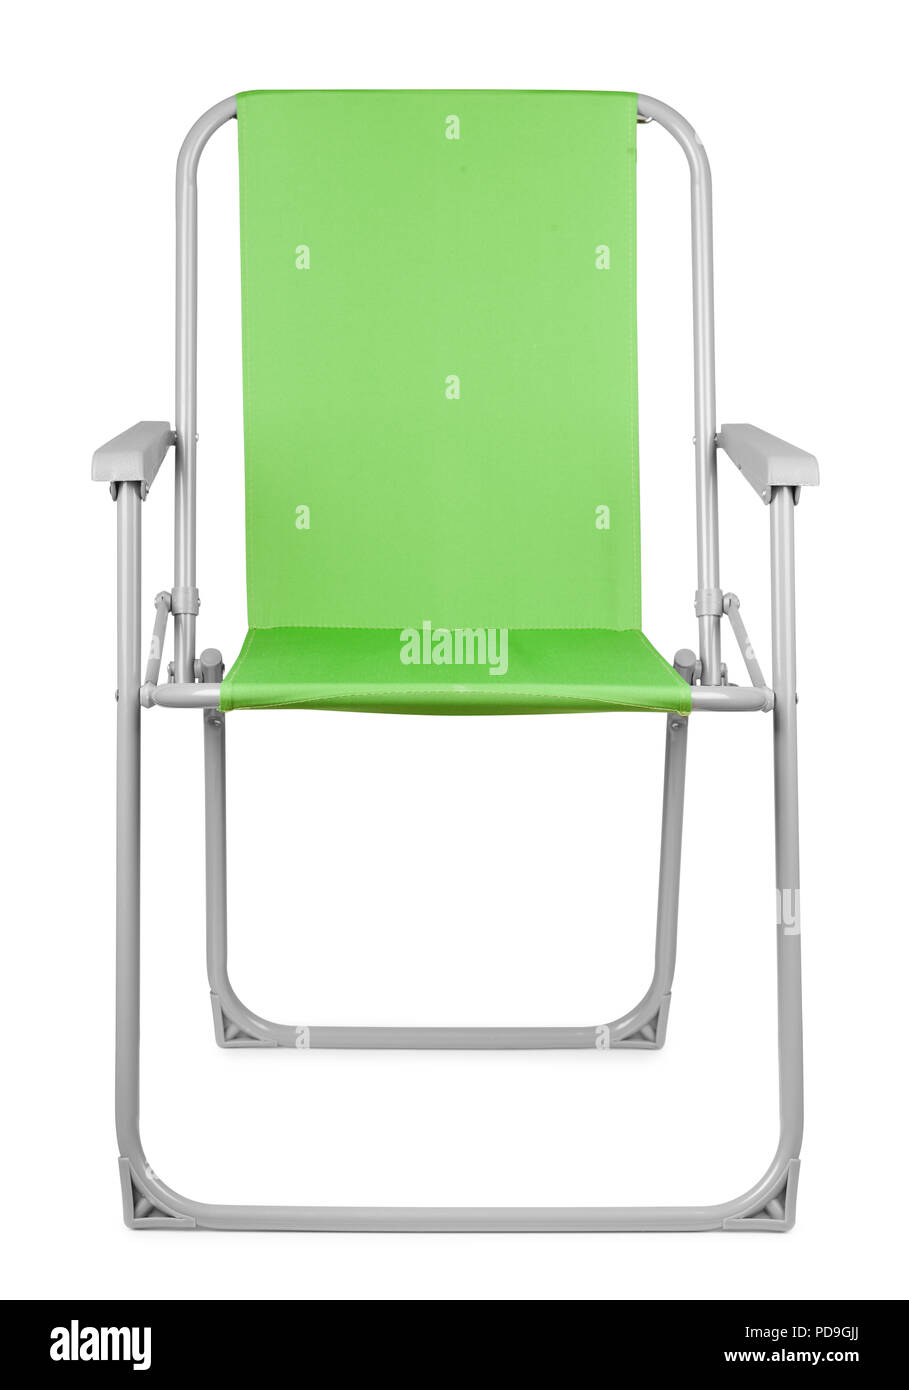 Front view of green folding chair isolated on white Stock Photo